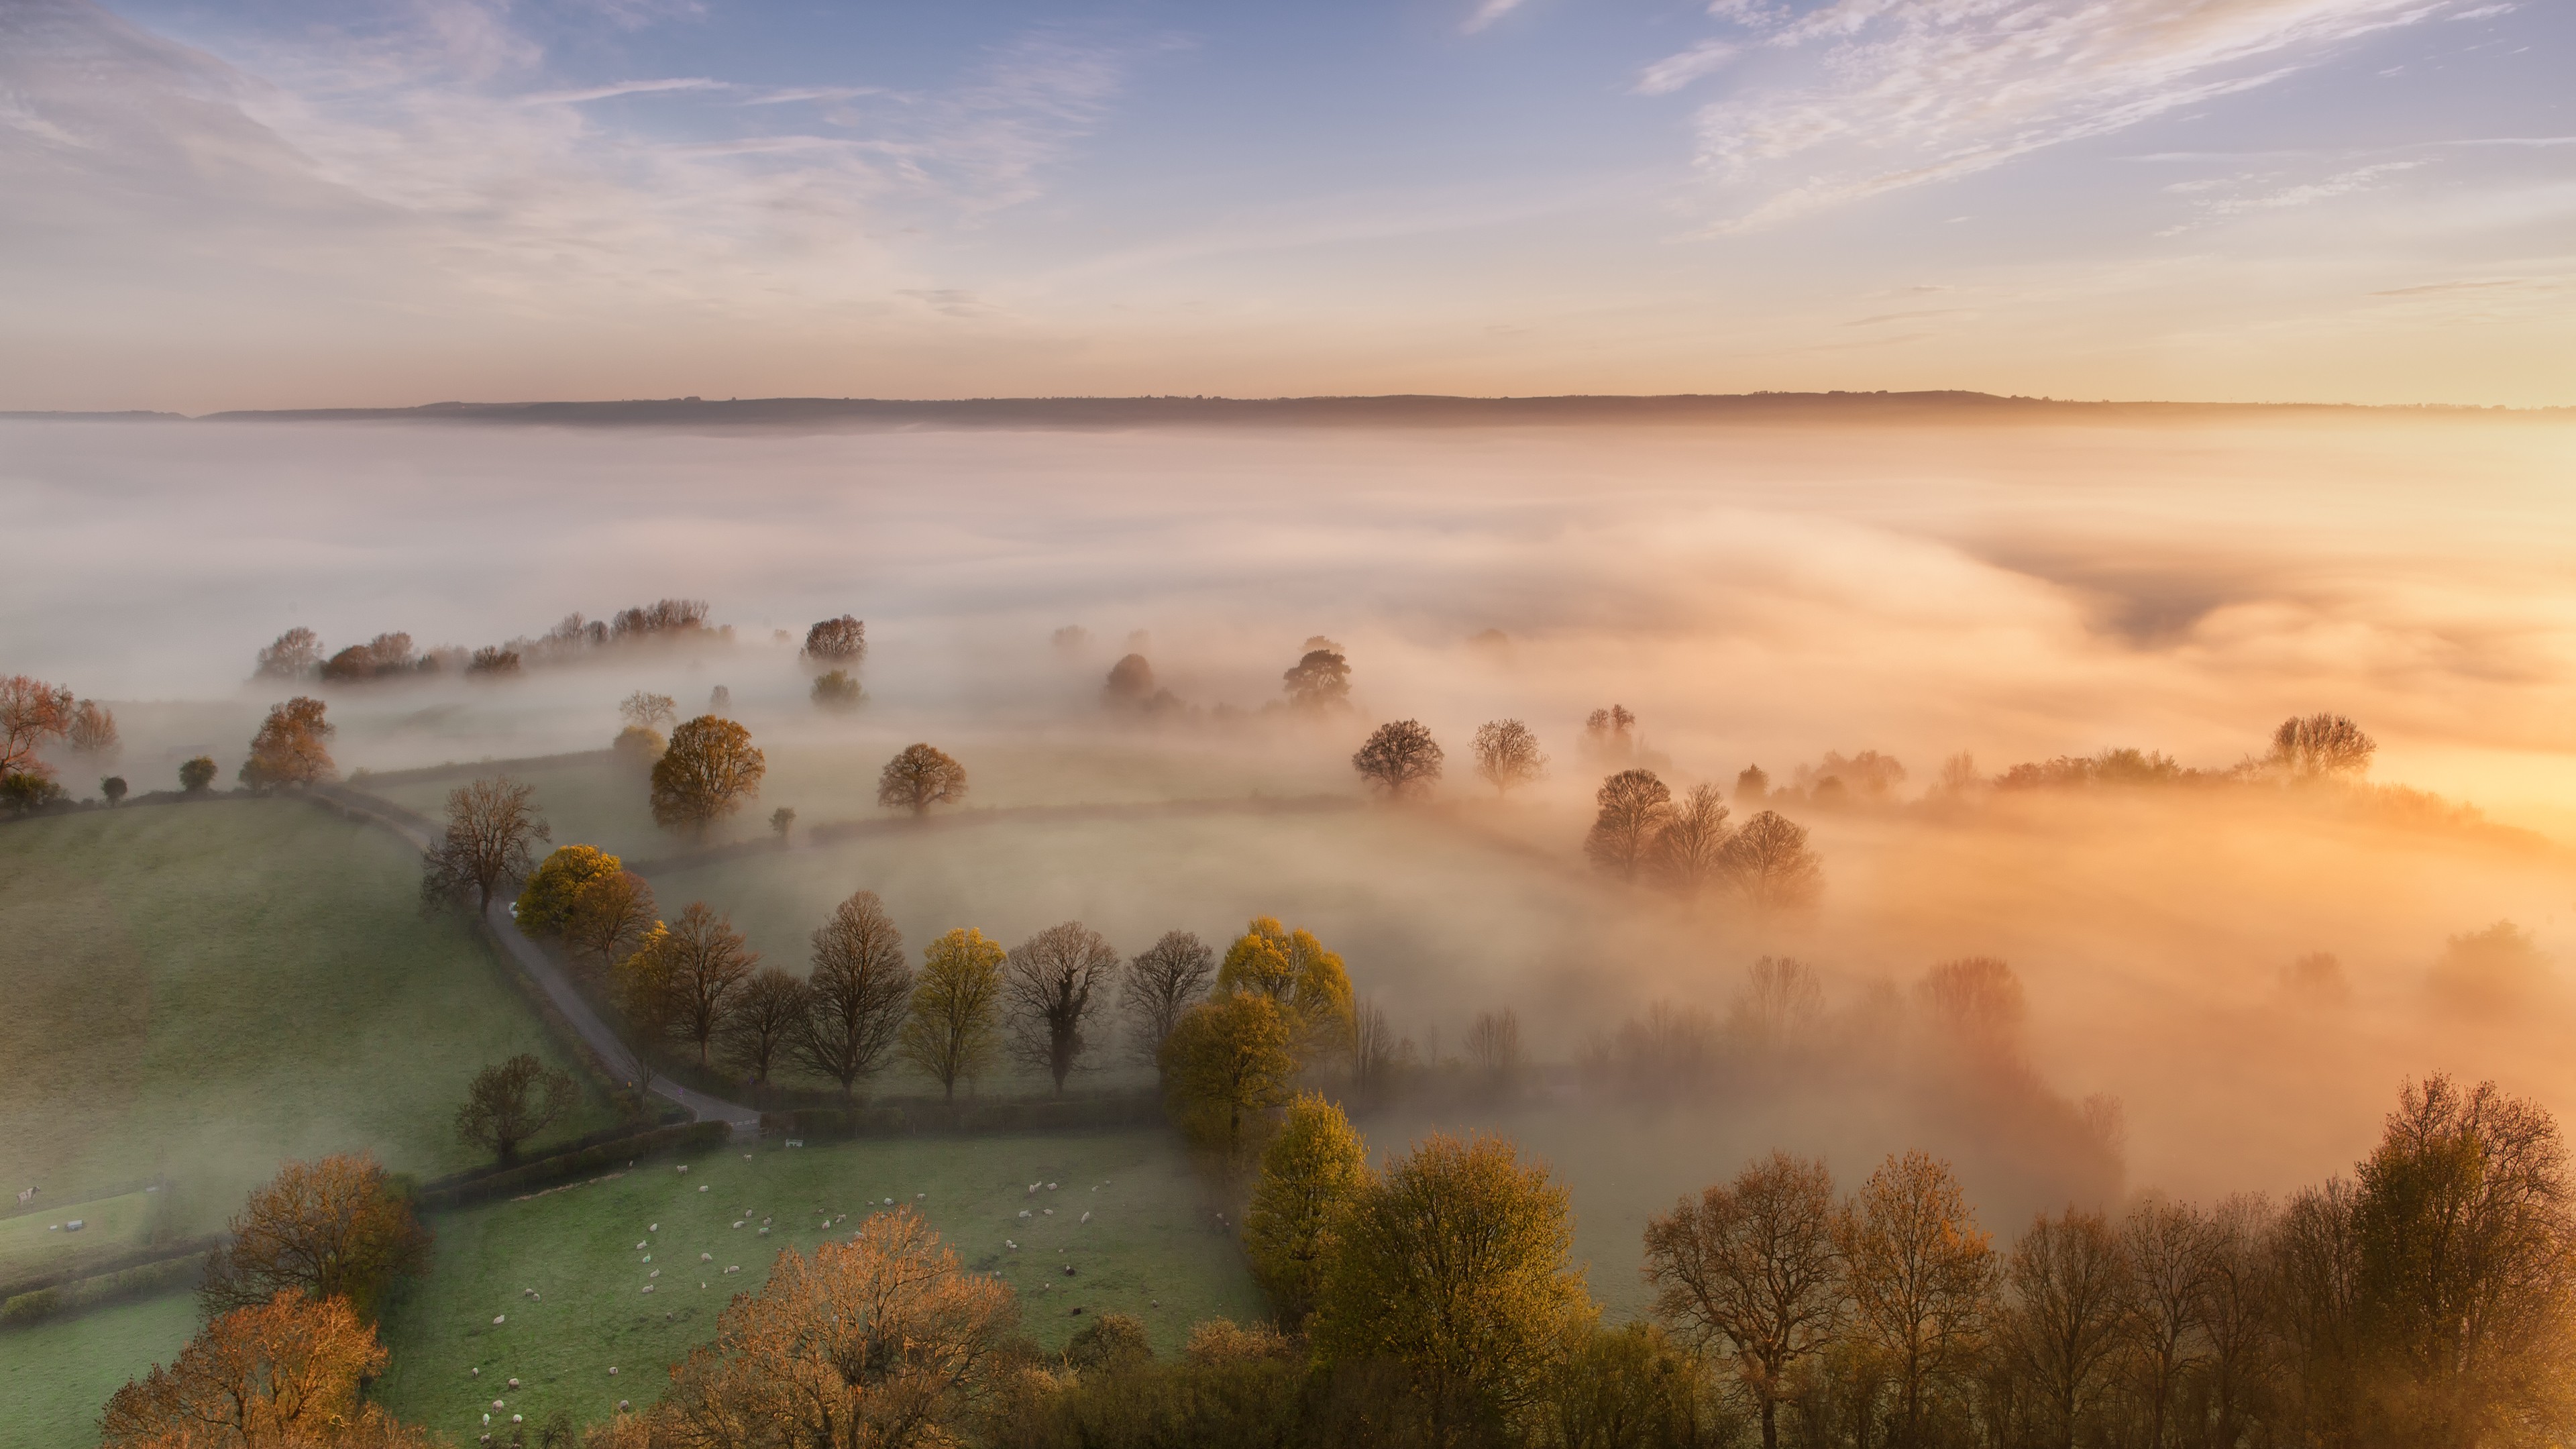 General 3840x2160 nature landscape mist trees dew morning aerial view field bird's eye view sunlight